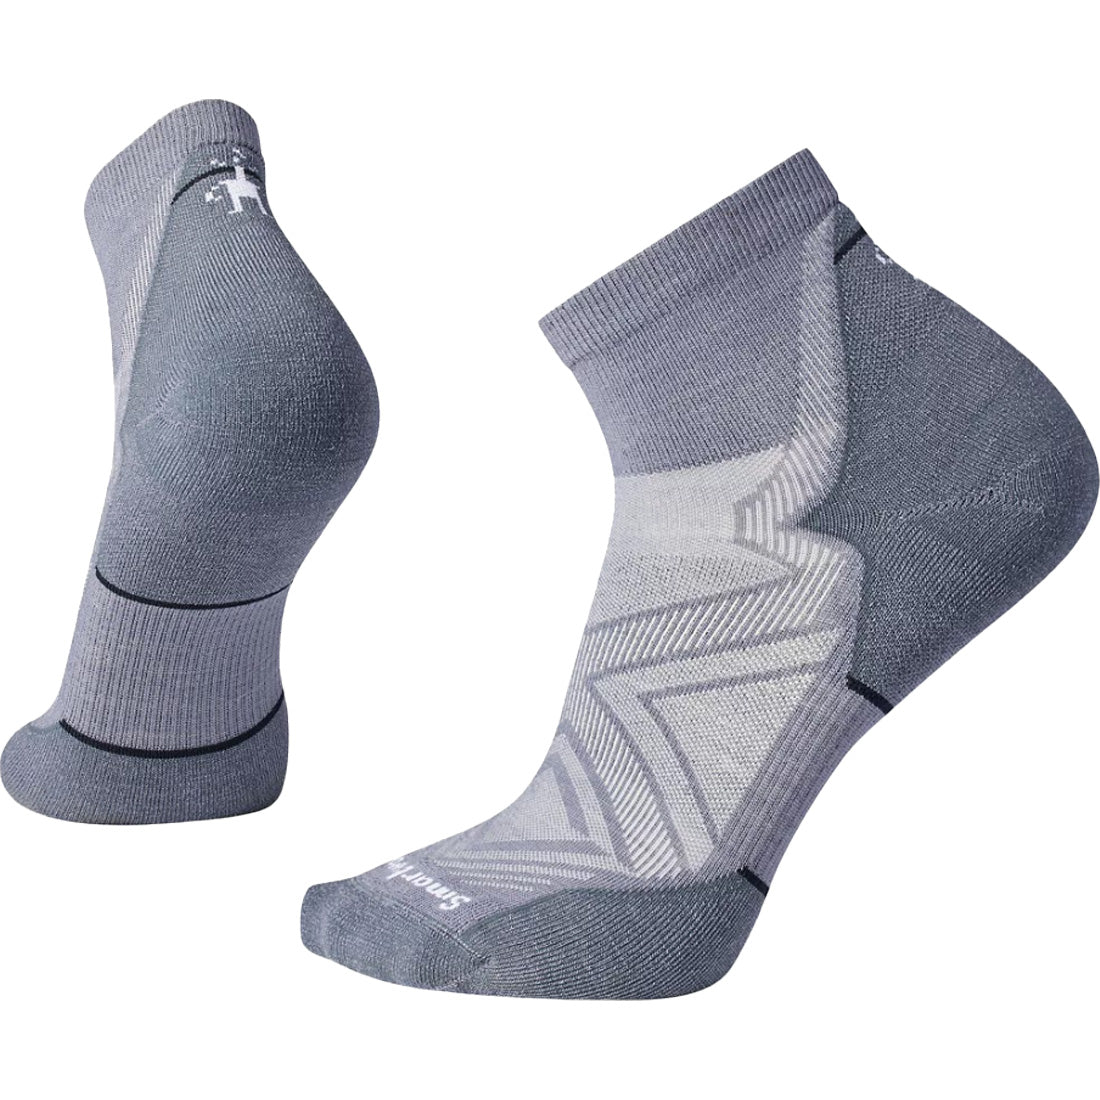 Smartwool Run Targeted Cushion Ankle Sock - Men's